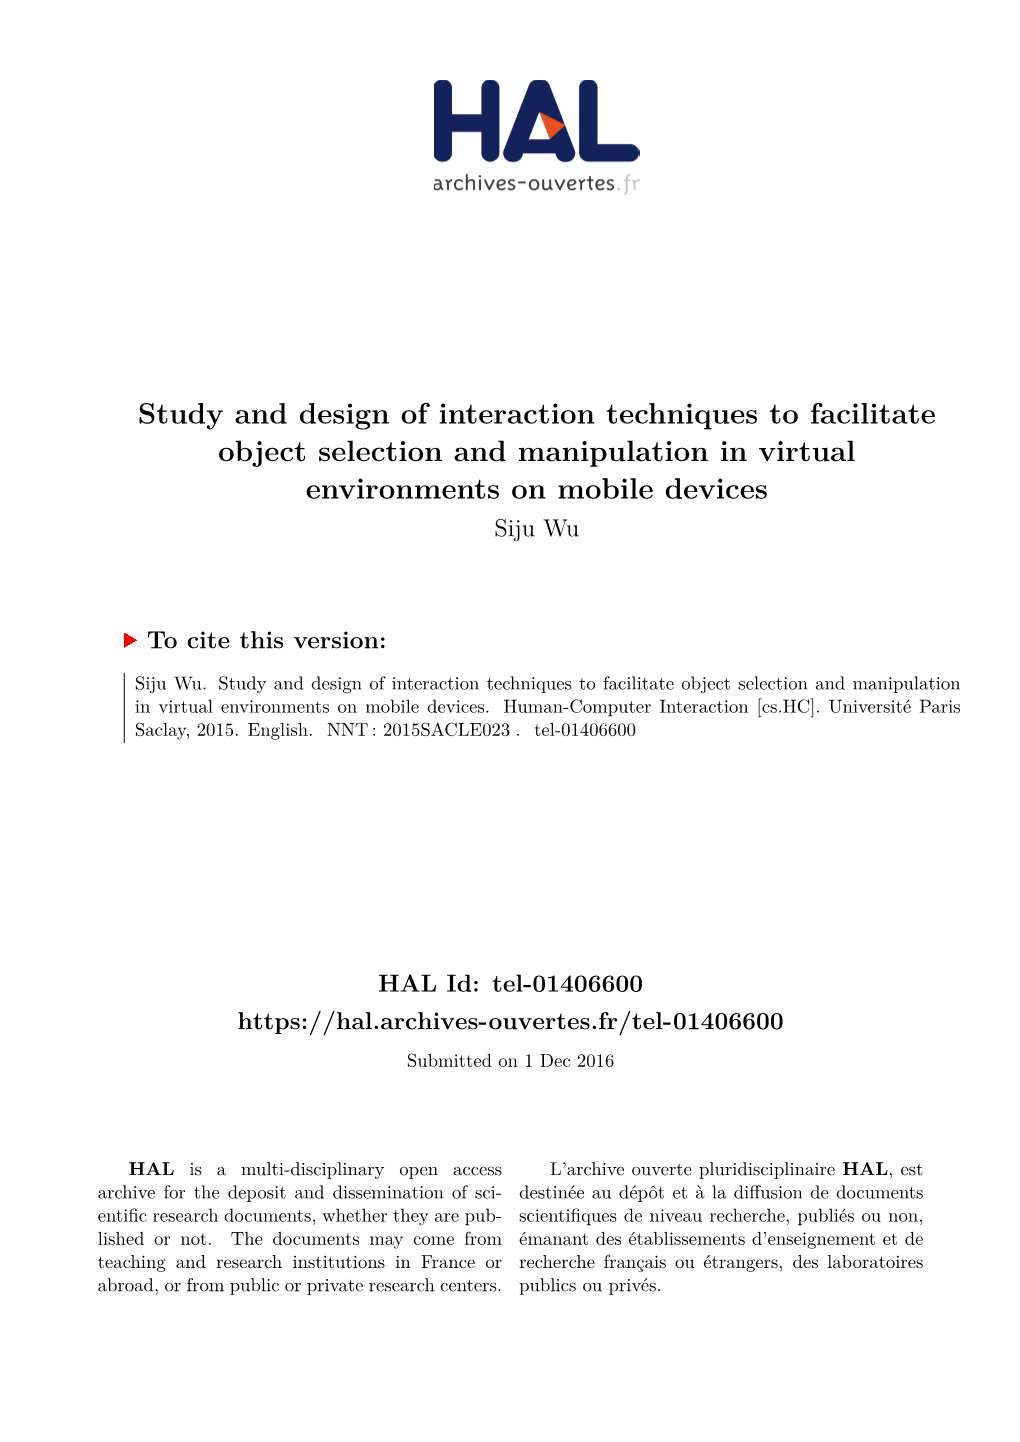 Study and Design of Interaction Techniques to Facilitate Object Selection and Manipulation in Virtual Environments on Mobile Devices Siju Wu